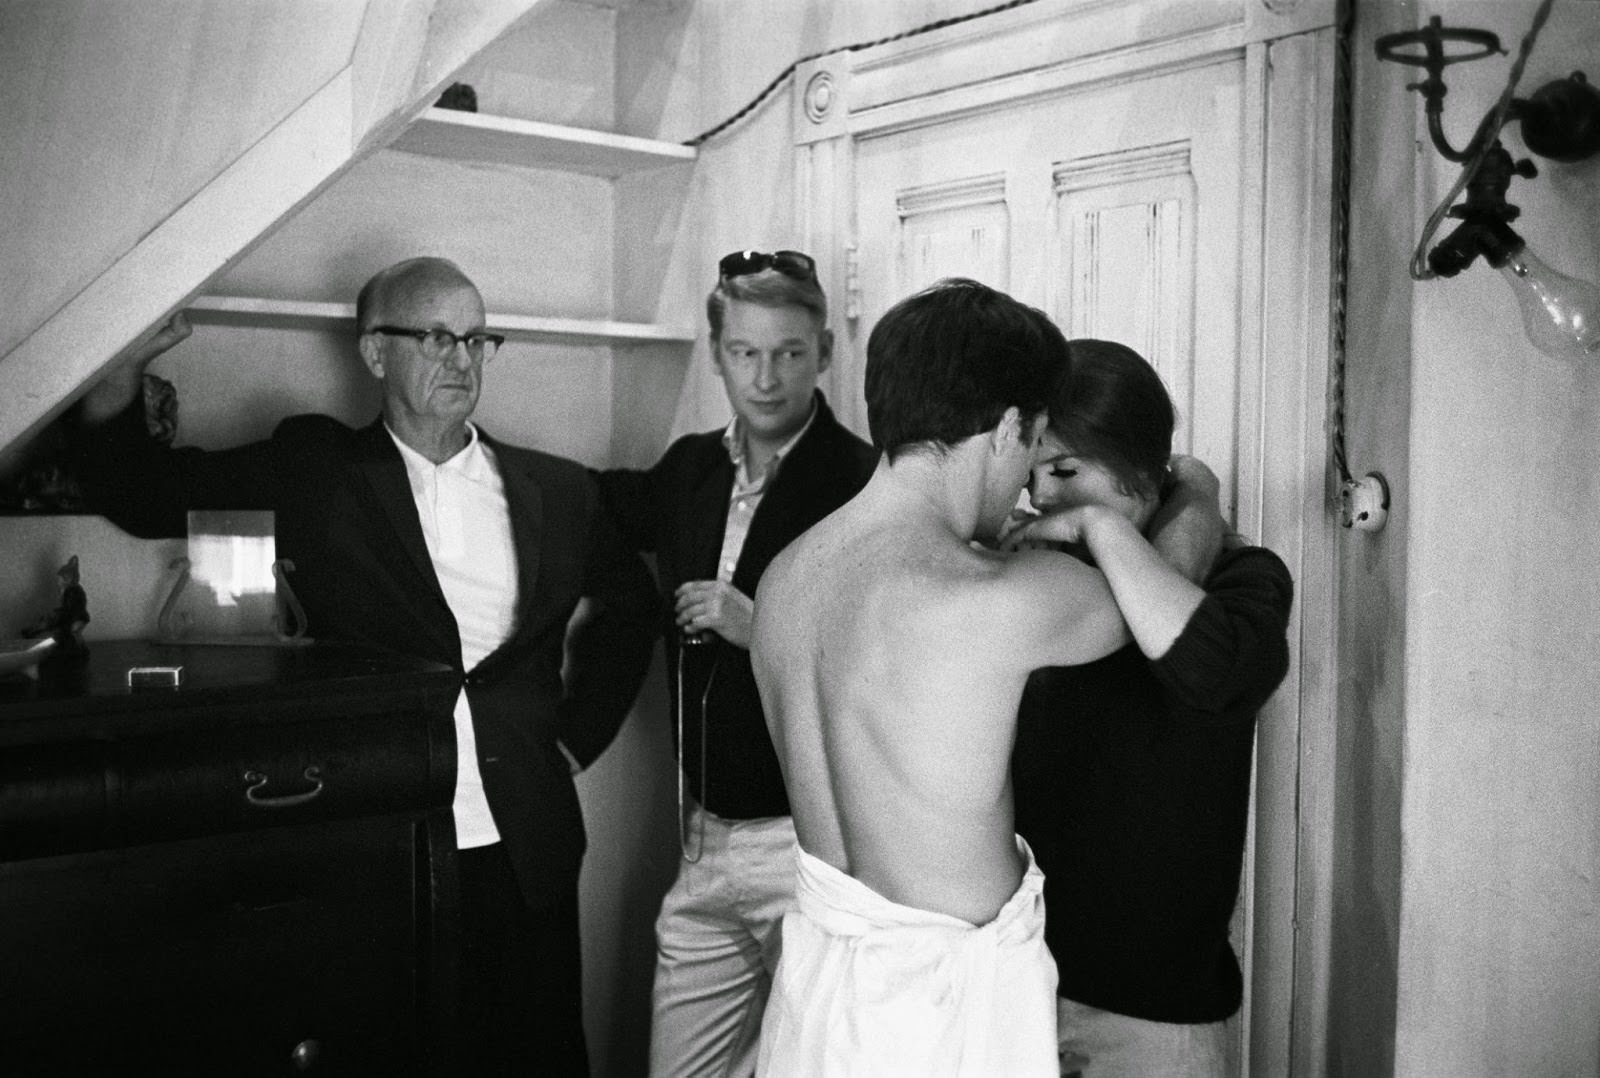 Mike Nichols on his rehearsal set of "The Graduate," with cinematographer Robert Surtees, Dustin Hoffman and Katharine Ross, 1967